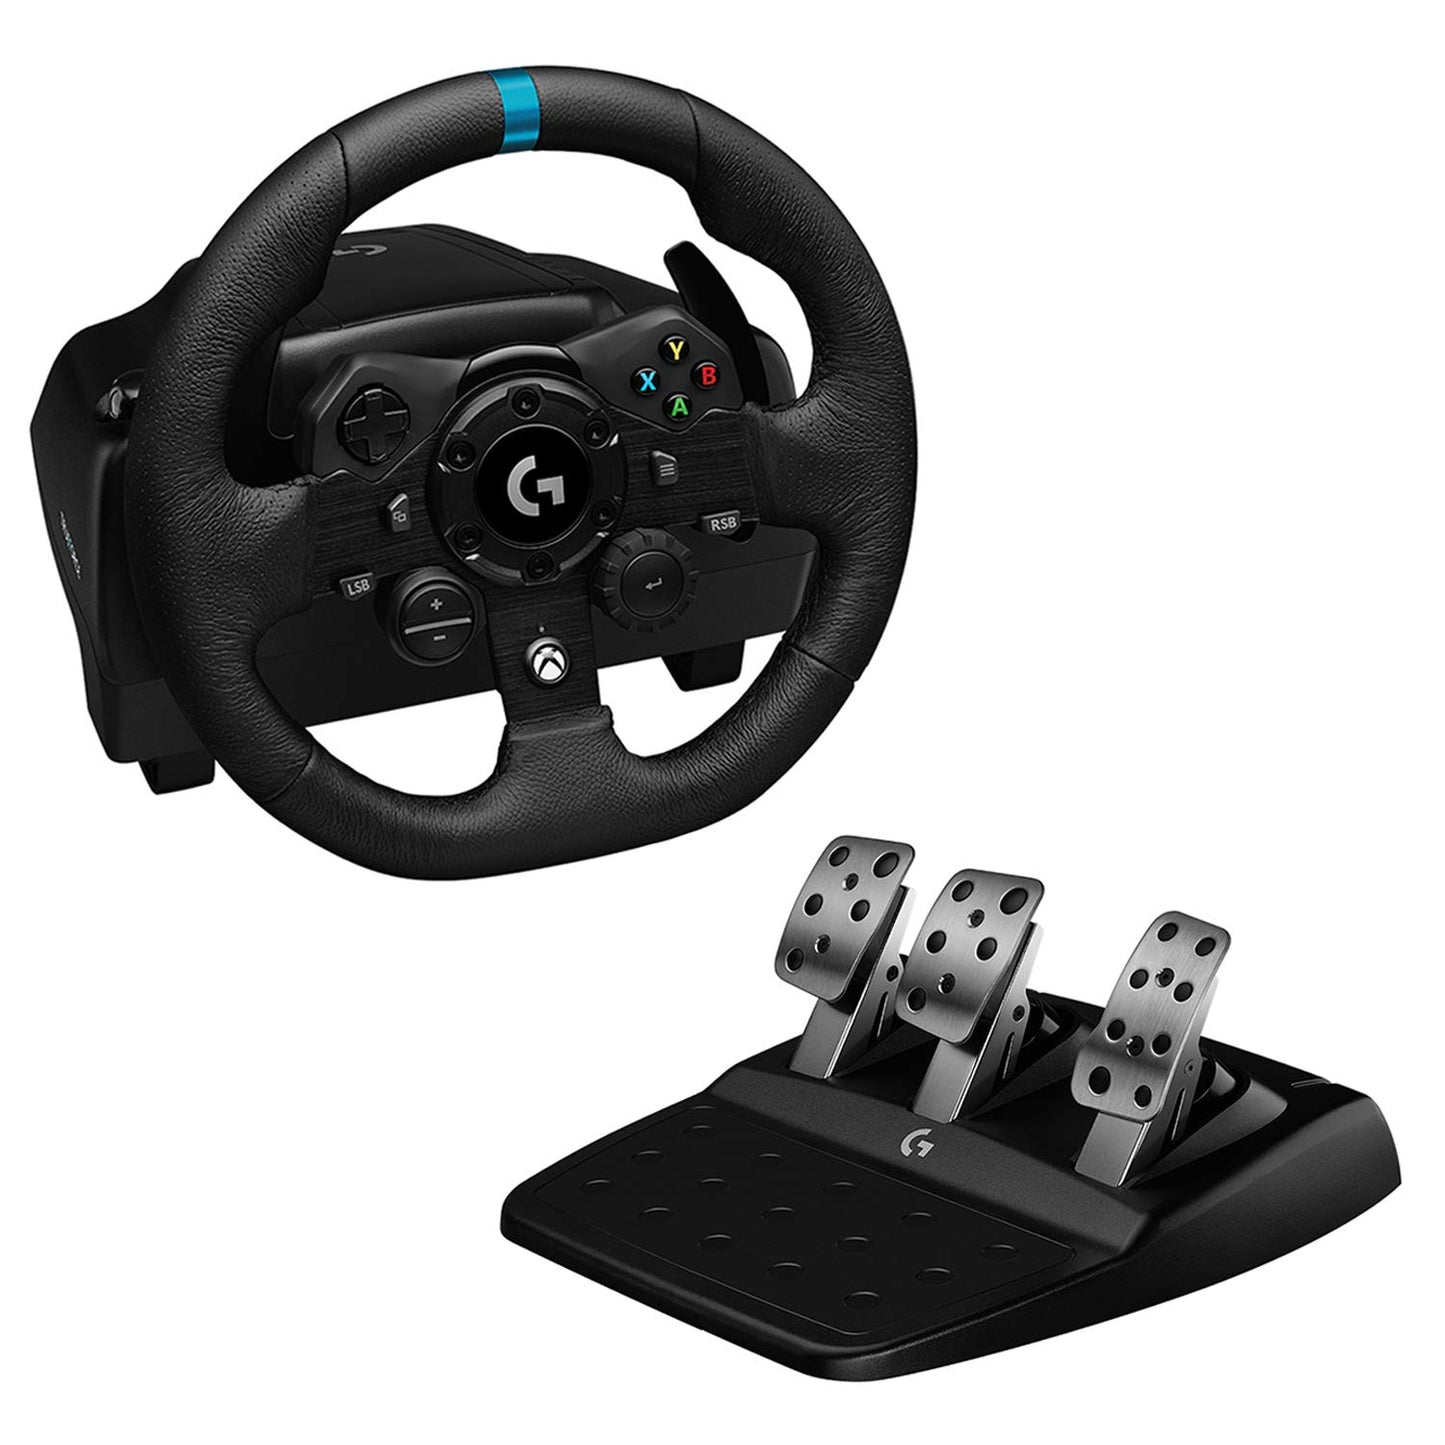 4tb hyperspin drive Multi Racing Arcade Kit with Logitech g923 wheel & Pedals (1133 RACING GAMES)